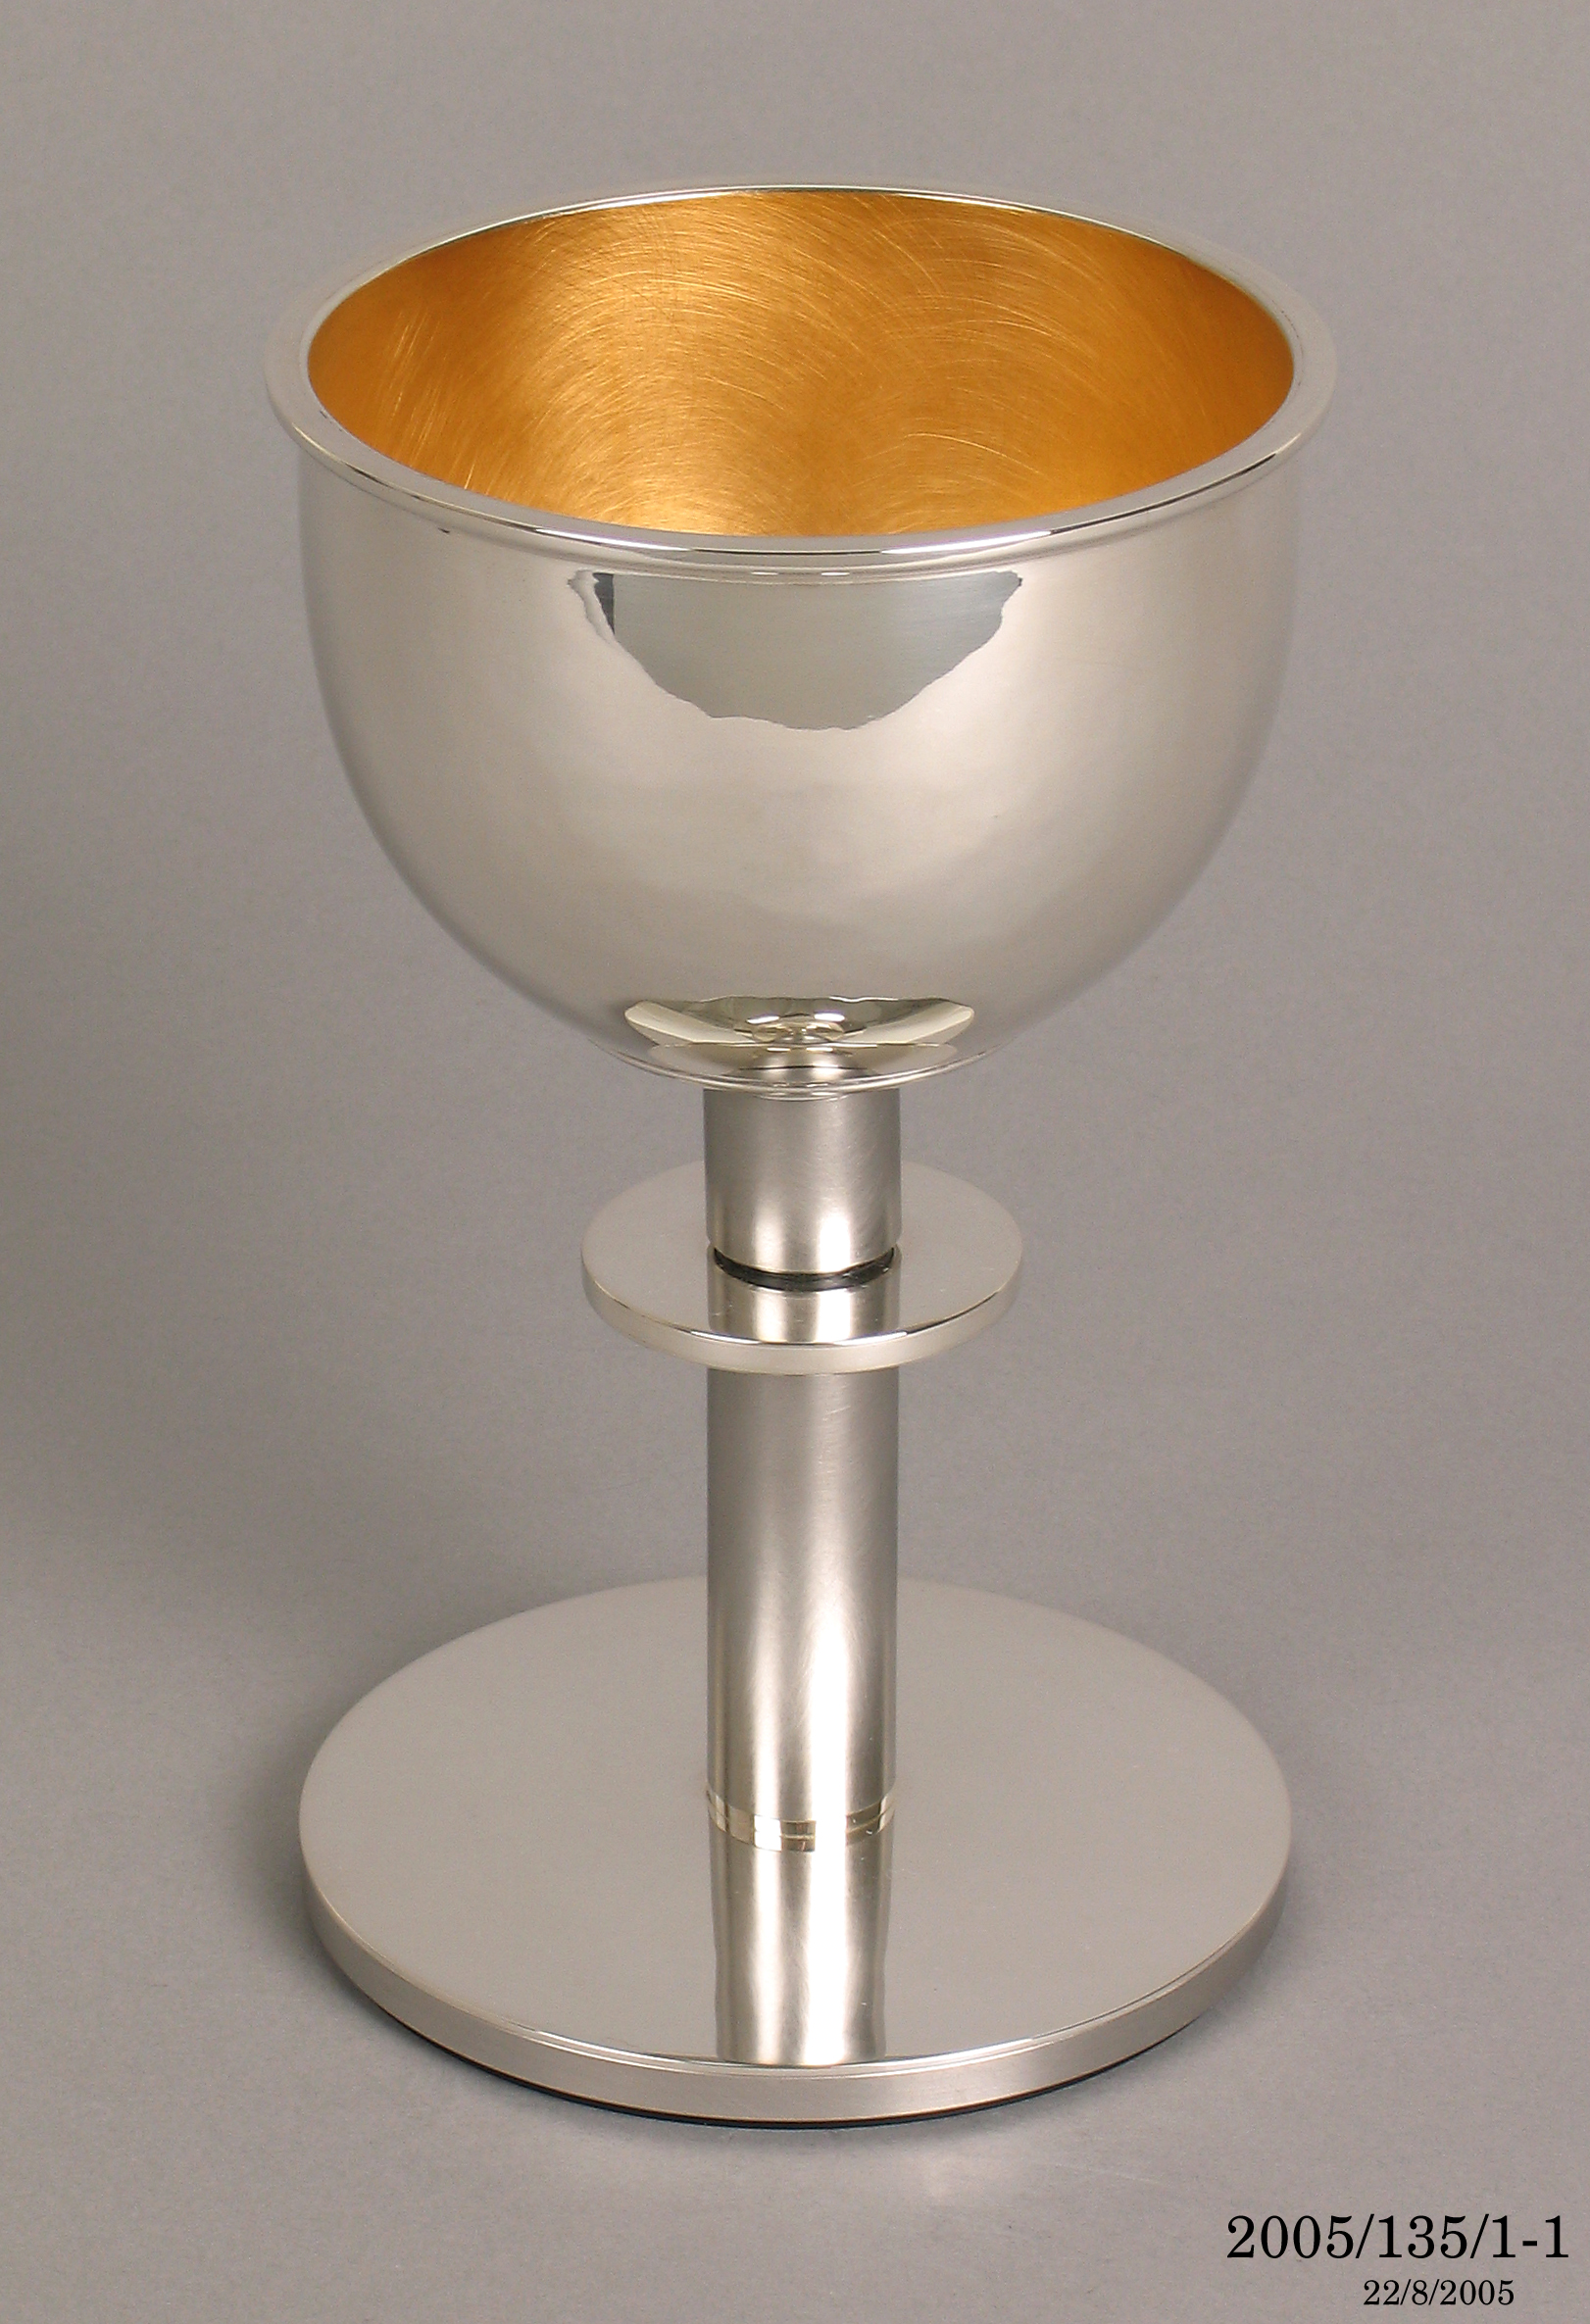 Prototype communion cup and communion plate for St Patrick's Cathedral by Hendrik Forster